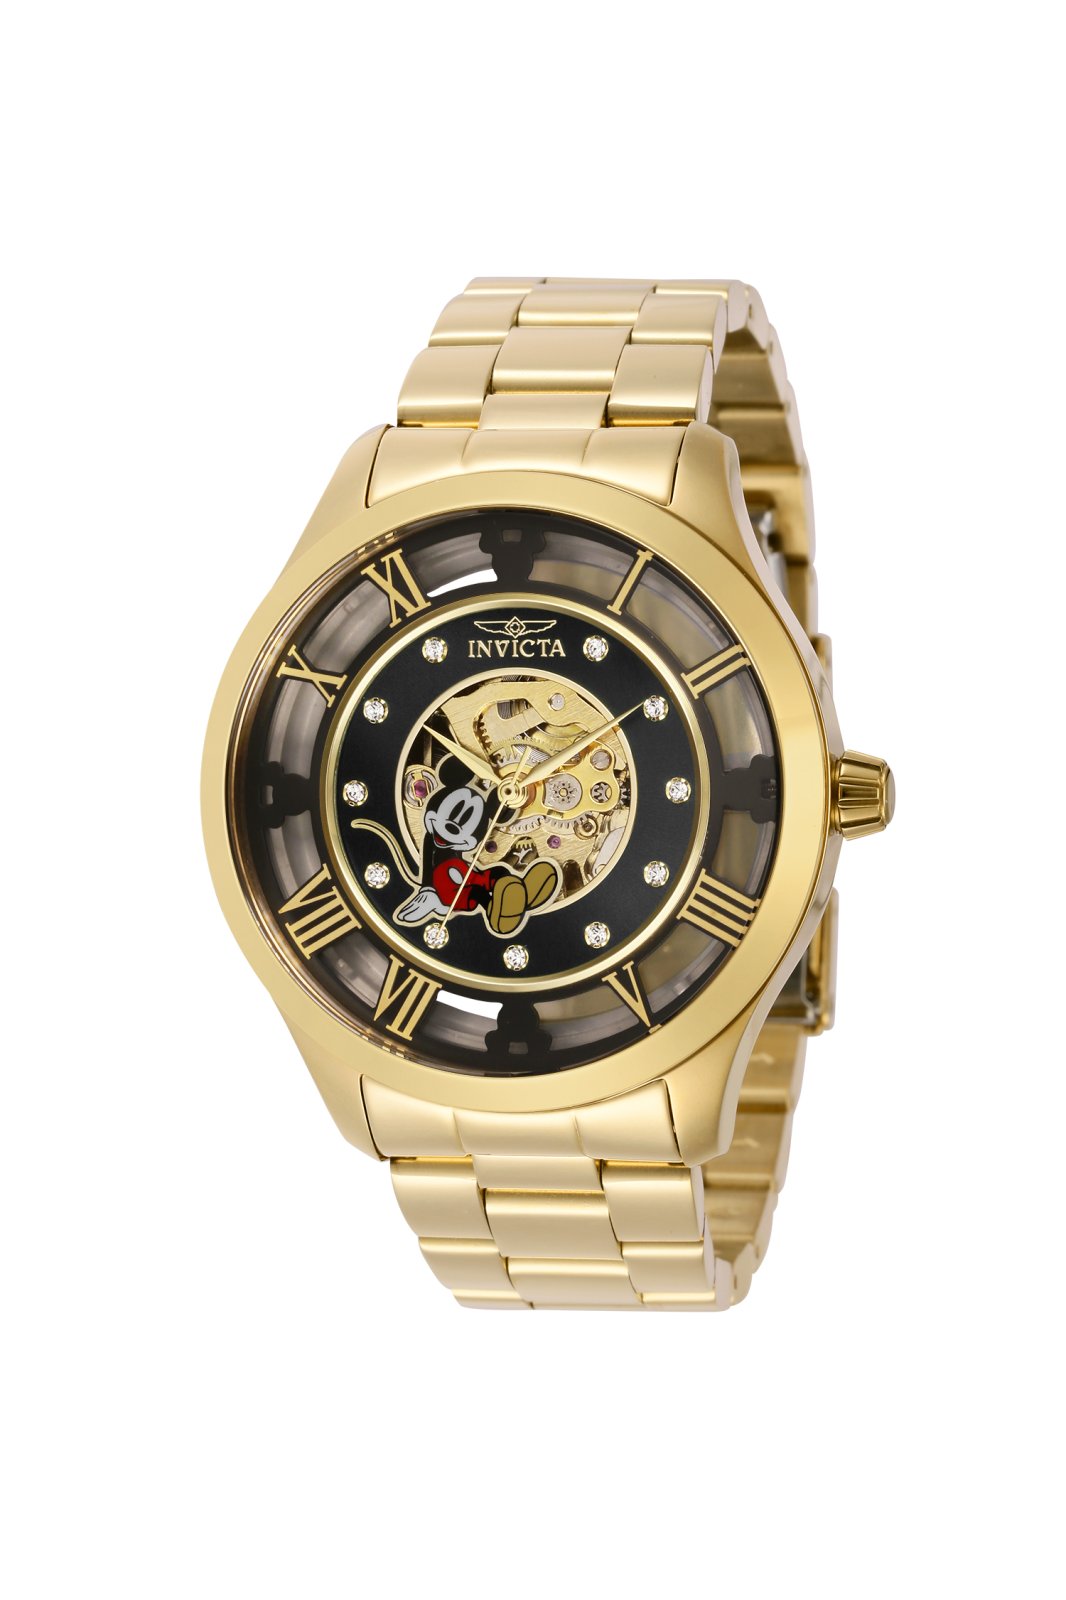 Invicta Disney - Mickey Mouse 41360 Men's Mechanical Watch - 45mm